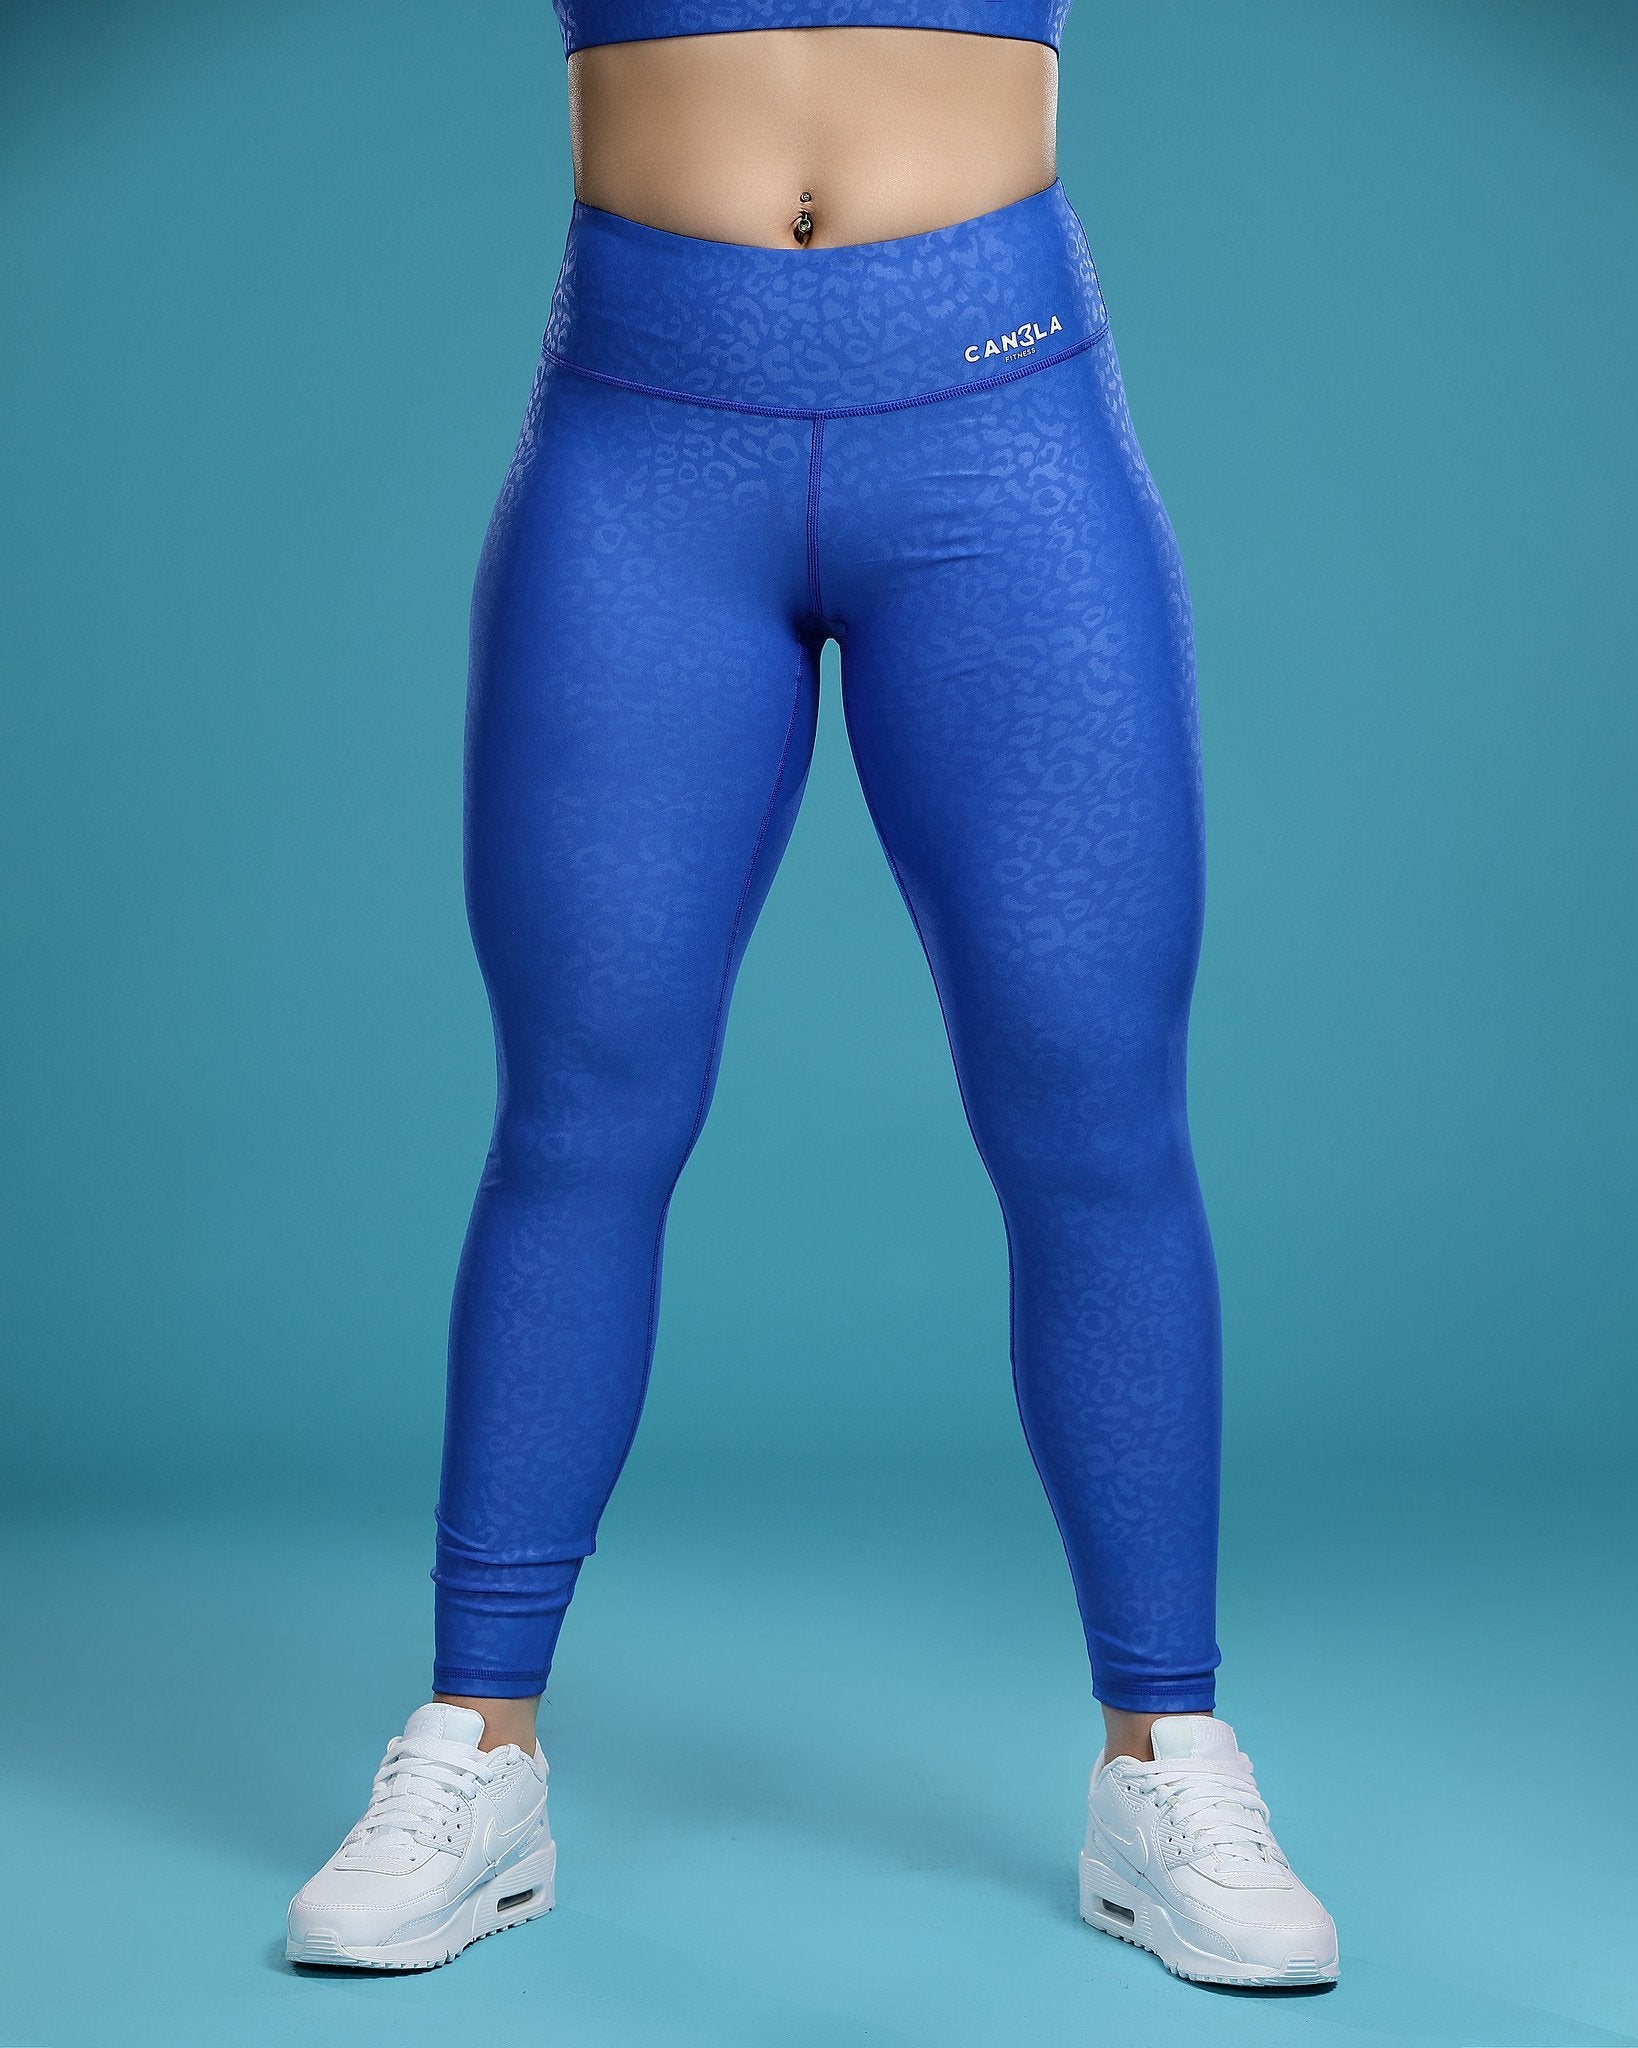 Shiny High-Waisted Leggings KATRIN ROYAL BLUE – Women's leggings at  affordable prices from Miss Leelas